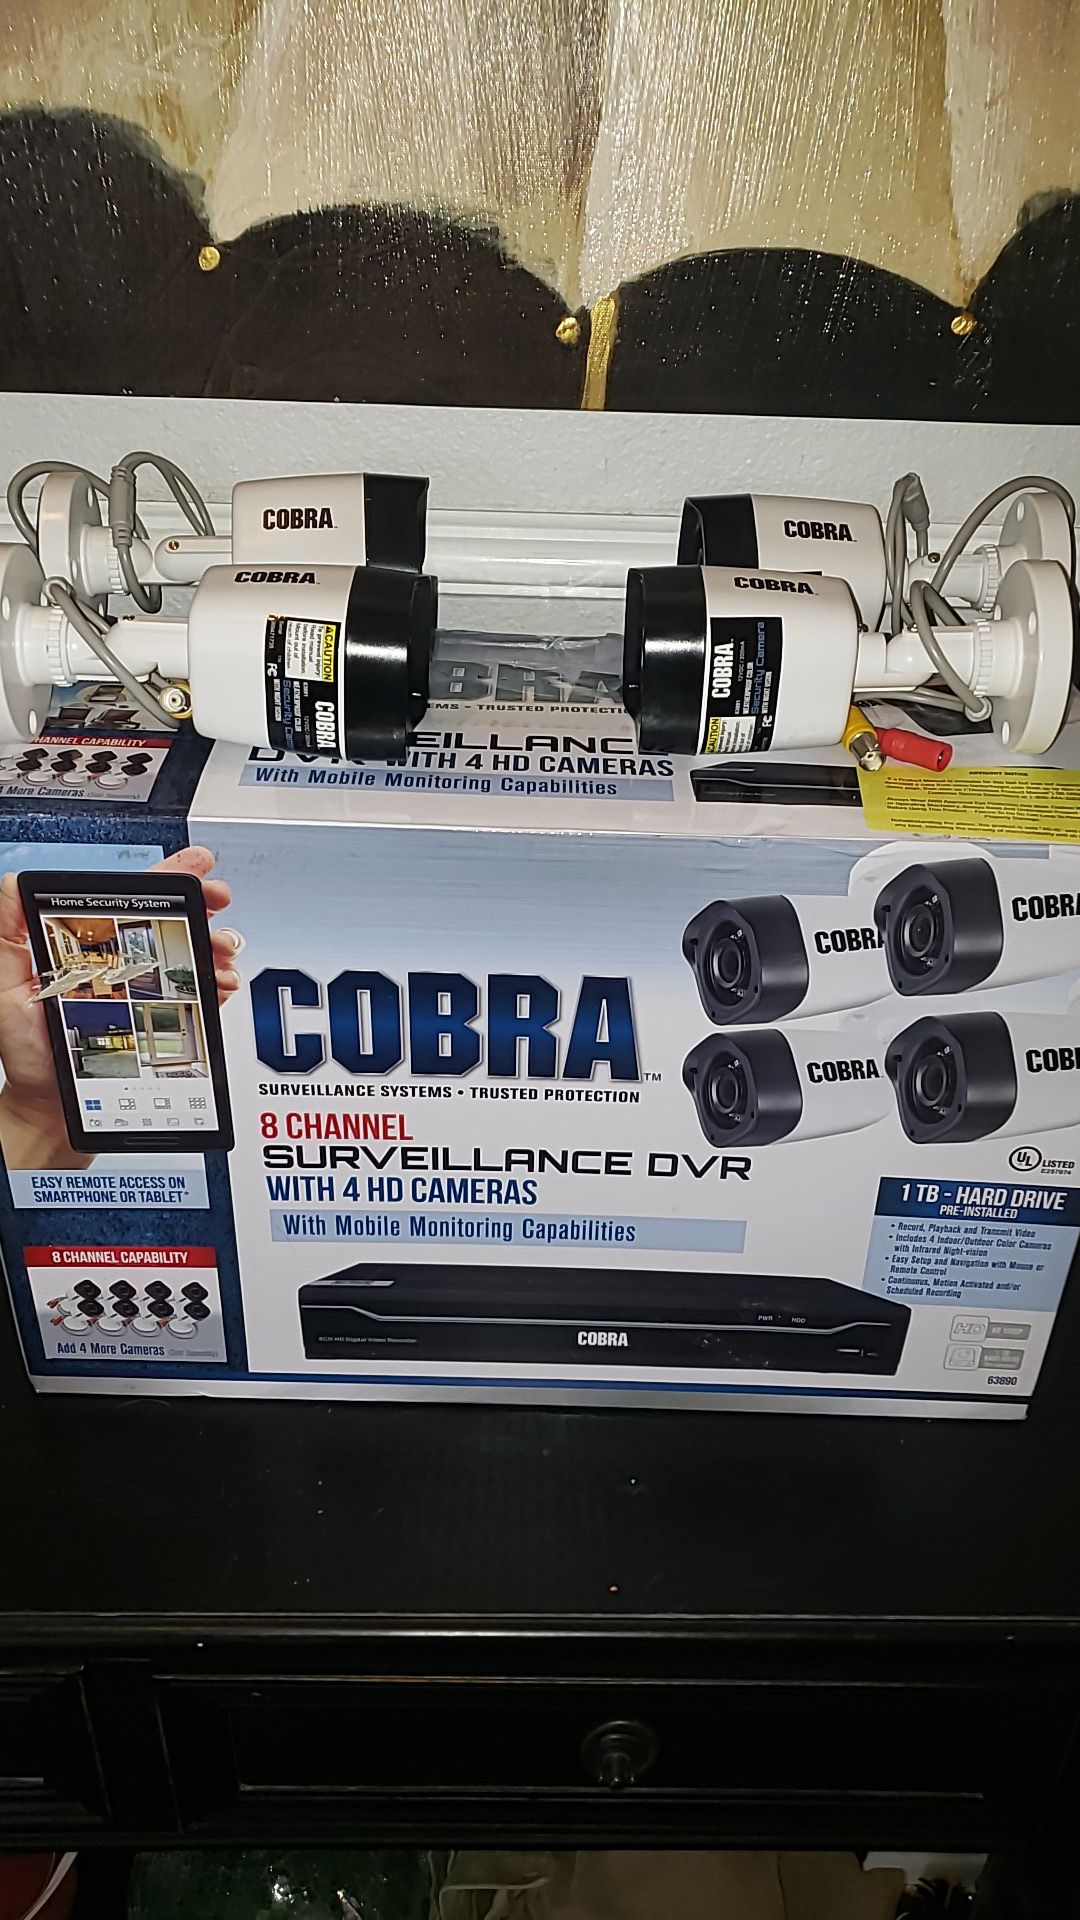 COBRA 8 CHANNEL SURVEILLANCE DVR WITH ALL 8 CAMERAS INCLUDED " WITH MOBILE MONITORING CAPABILITIES"